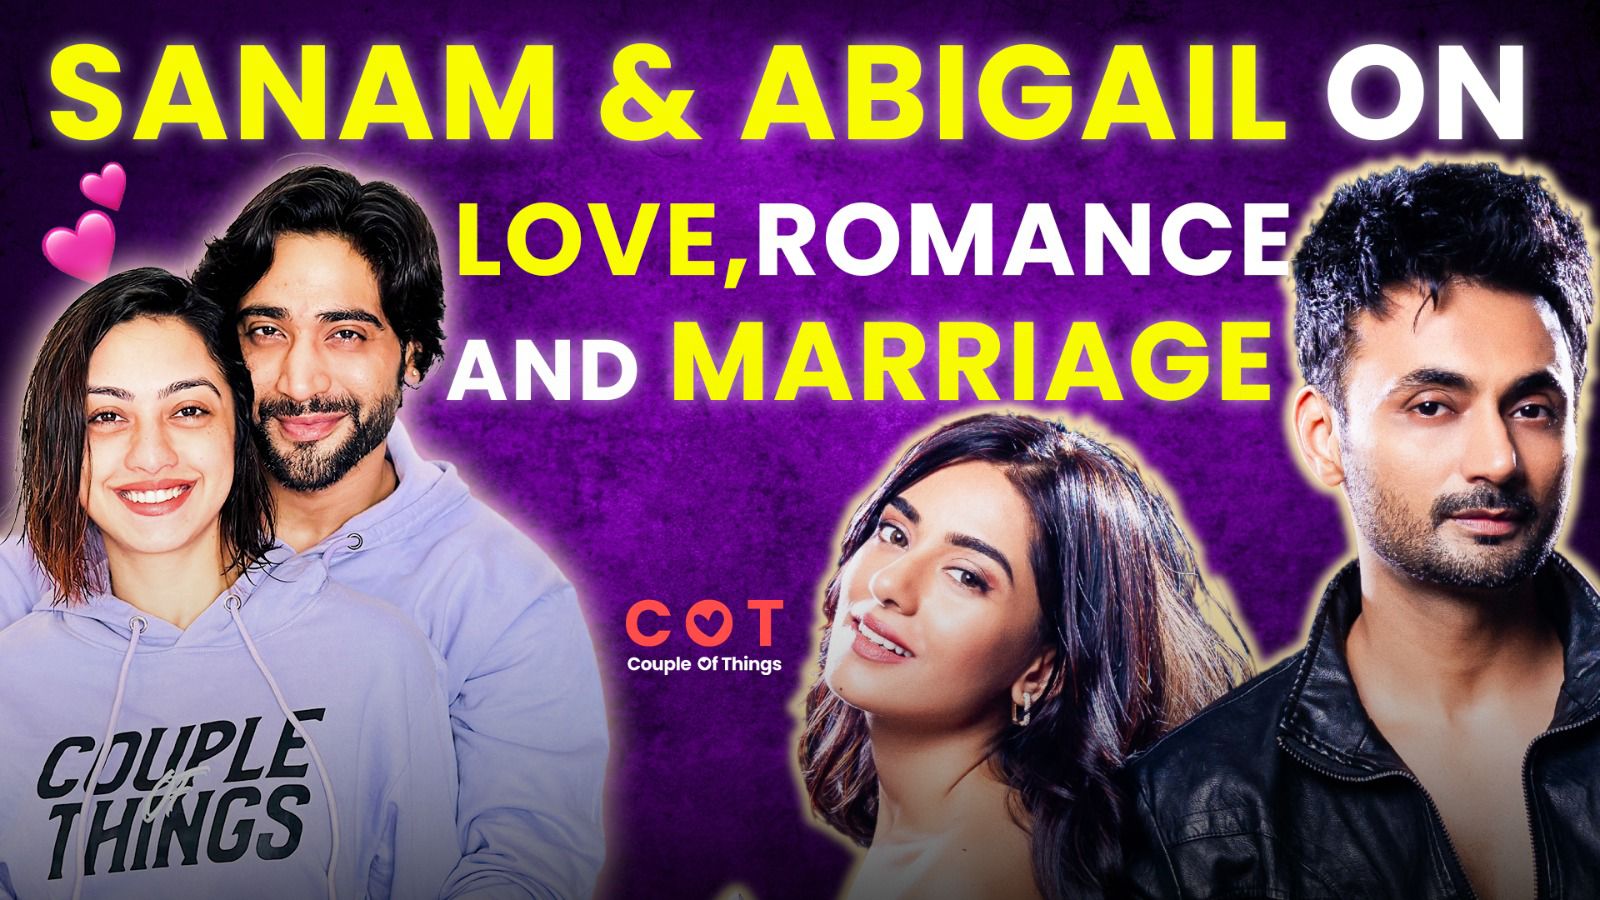 In ‘Couple of Things’ Sanam Johar and Abigail Pande reveal their marraige plans!